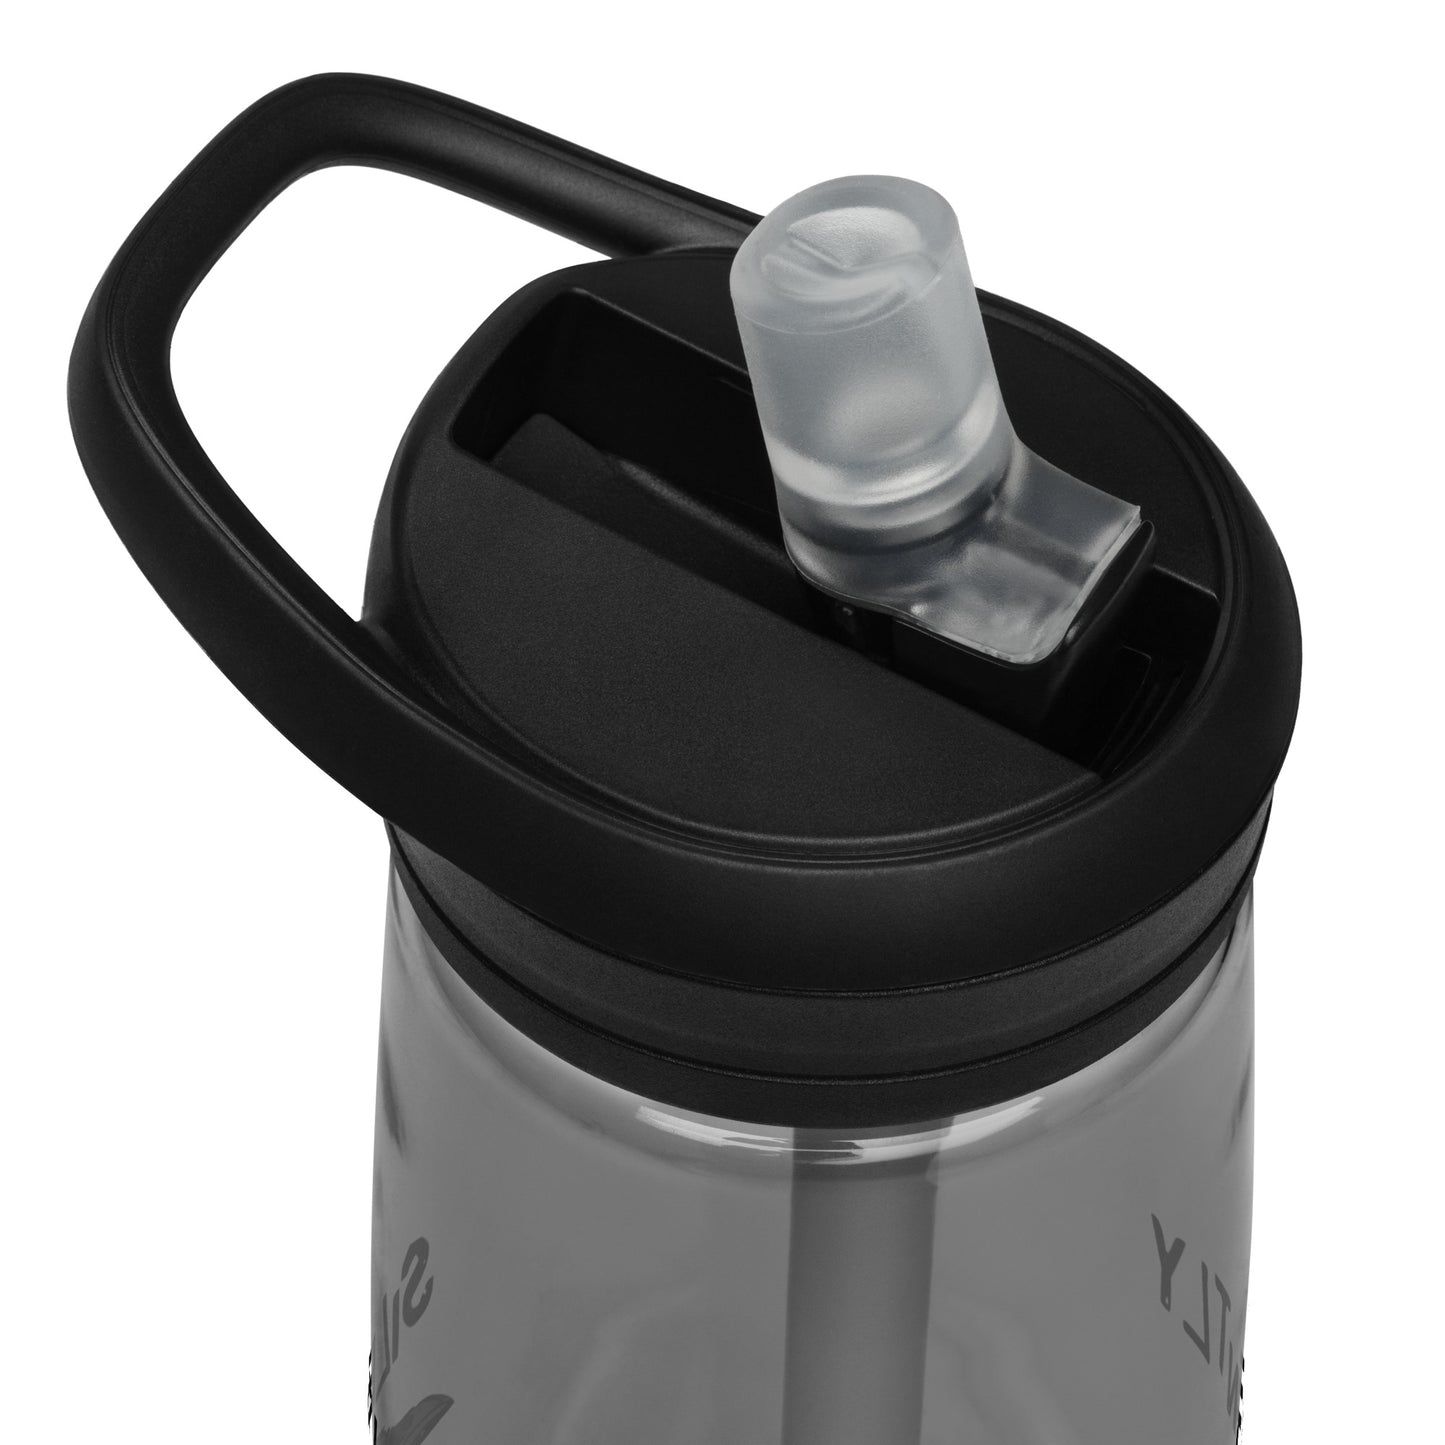 25 ounce sports water bottle with spill-proof lid and bite valve. Charcoal grey stain and odor-resistant BPA-free plastic. Features double-sided design of Silently Judging Crow with his monocle. Detail view of bite valve and lid.